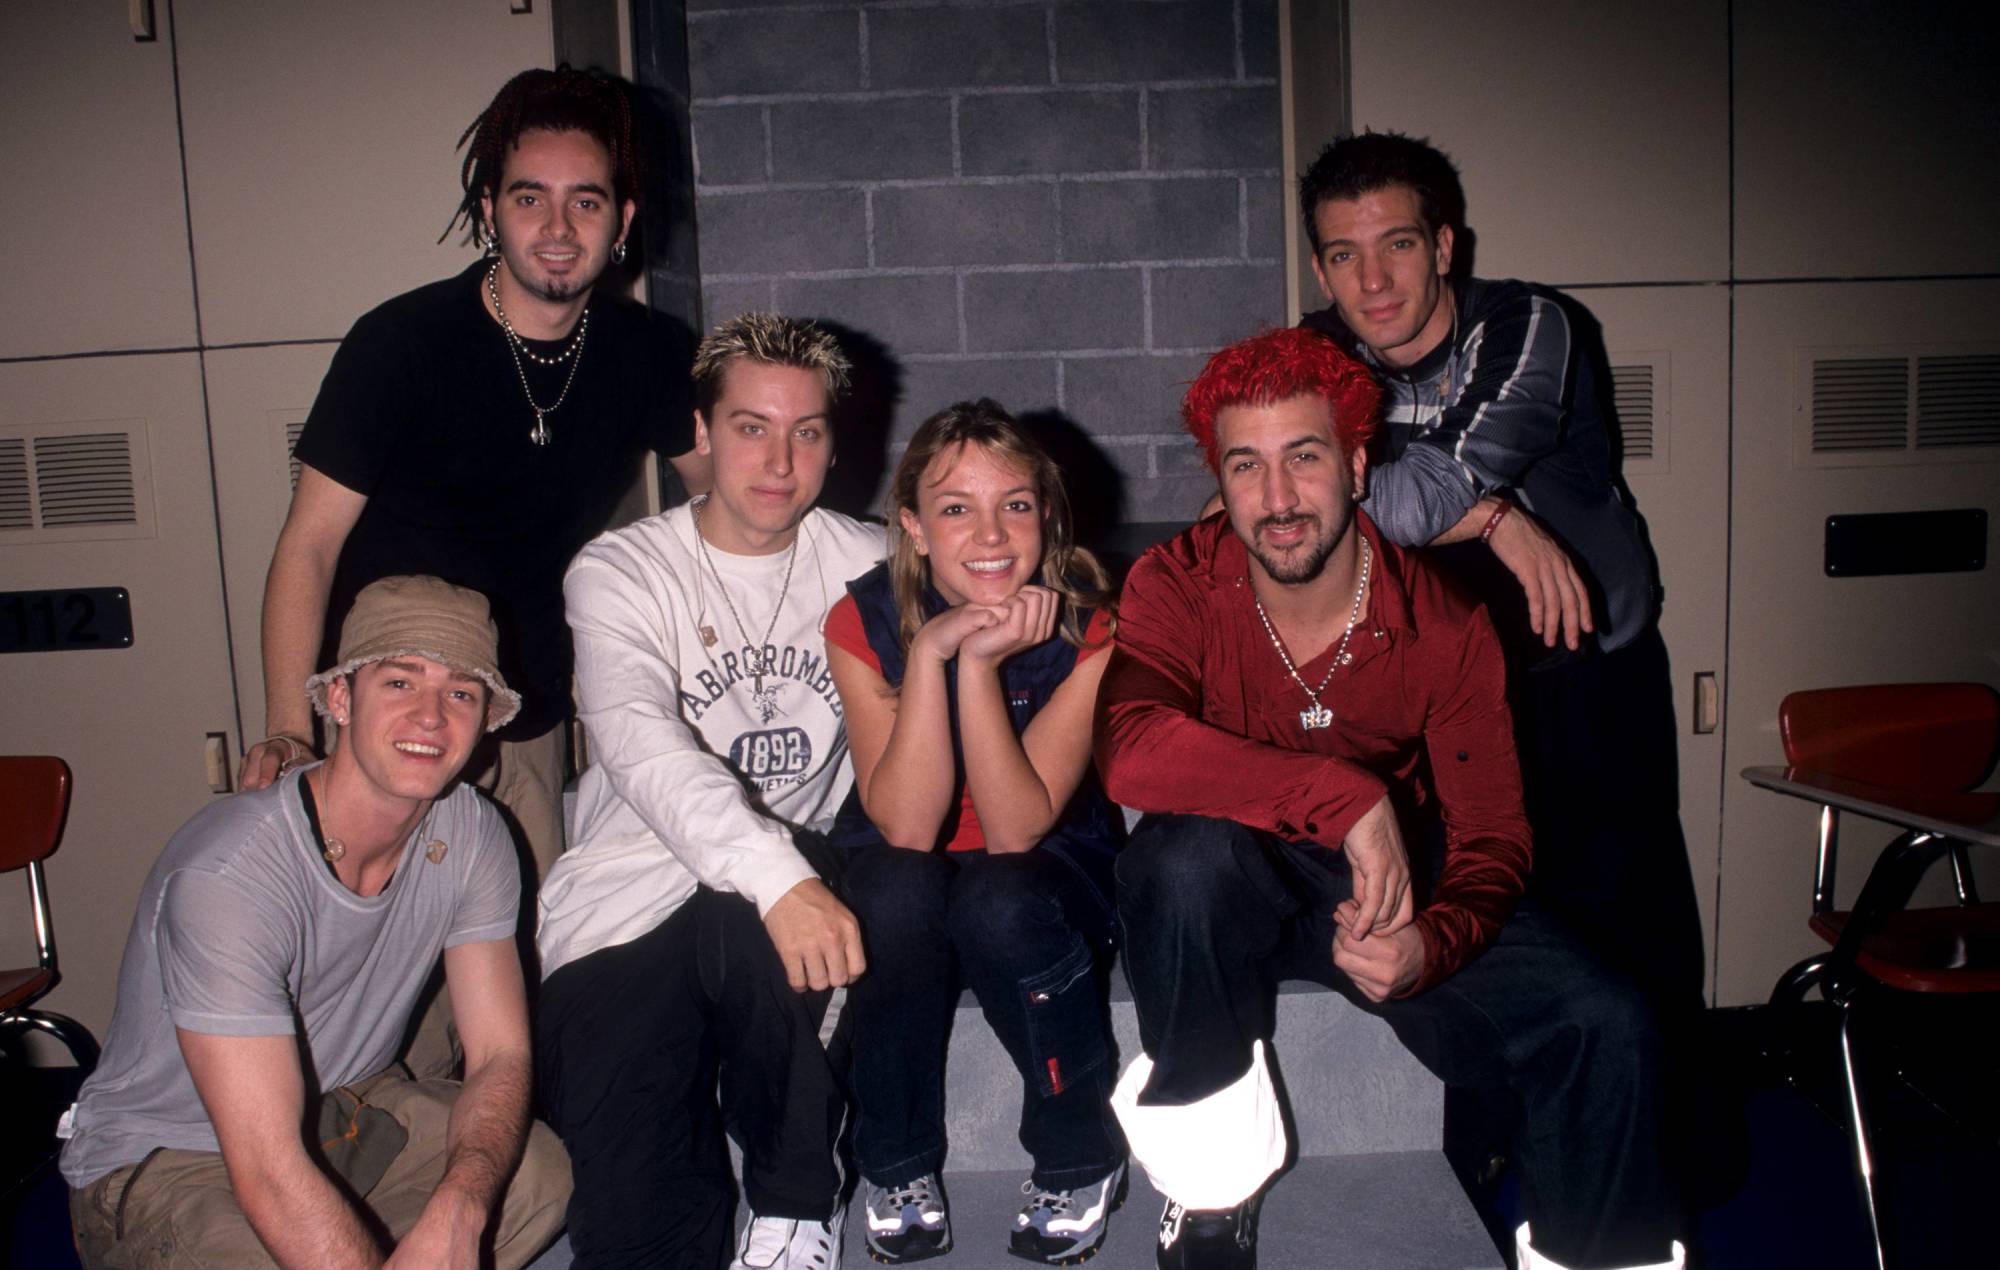 Britney Spears claims that *NSYNC “tried too hard” to fit in with Black artists